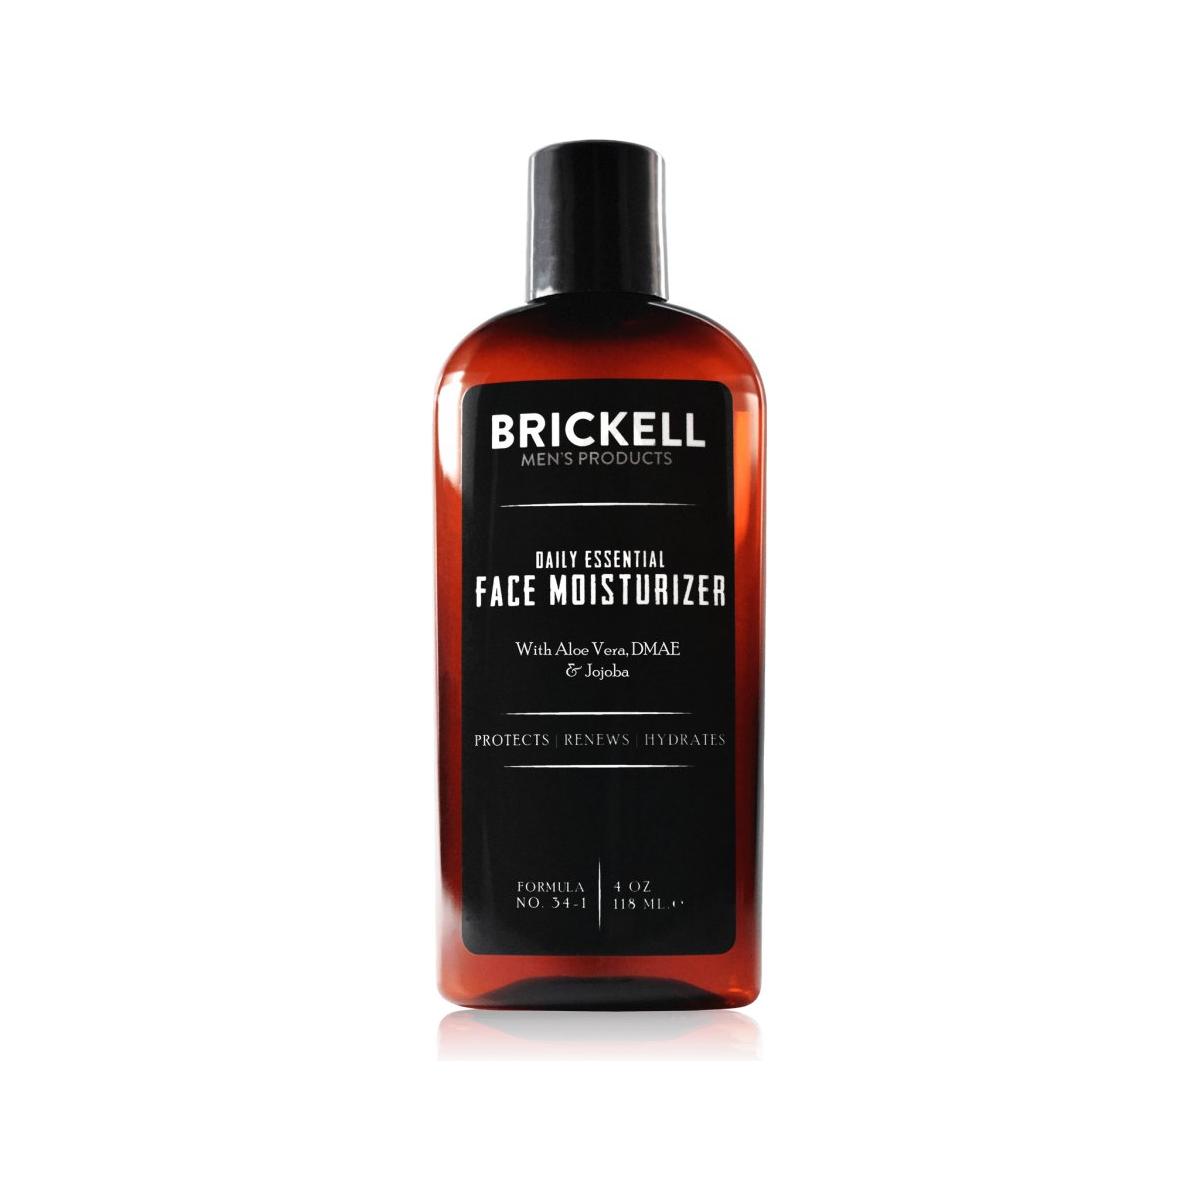 Brickell Daily Essential Face Moisturizer - 118ml - Glam Global UK